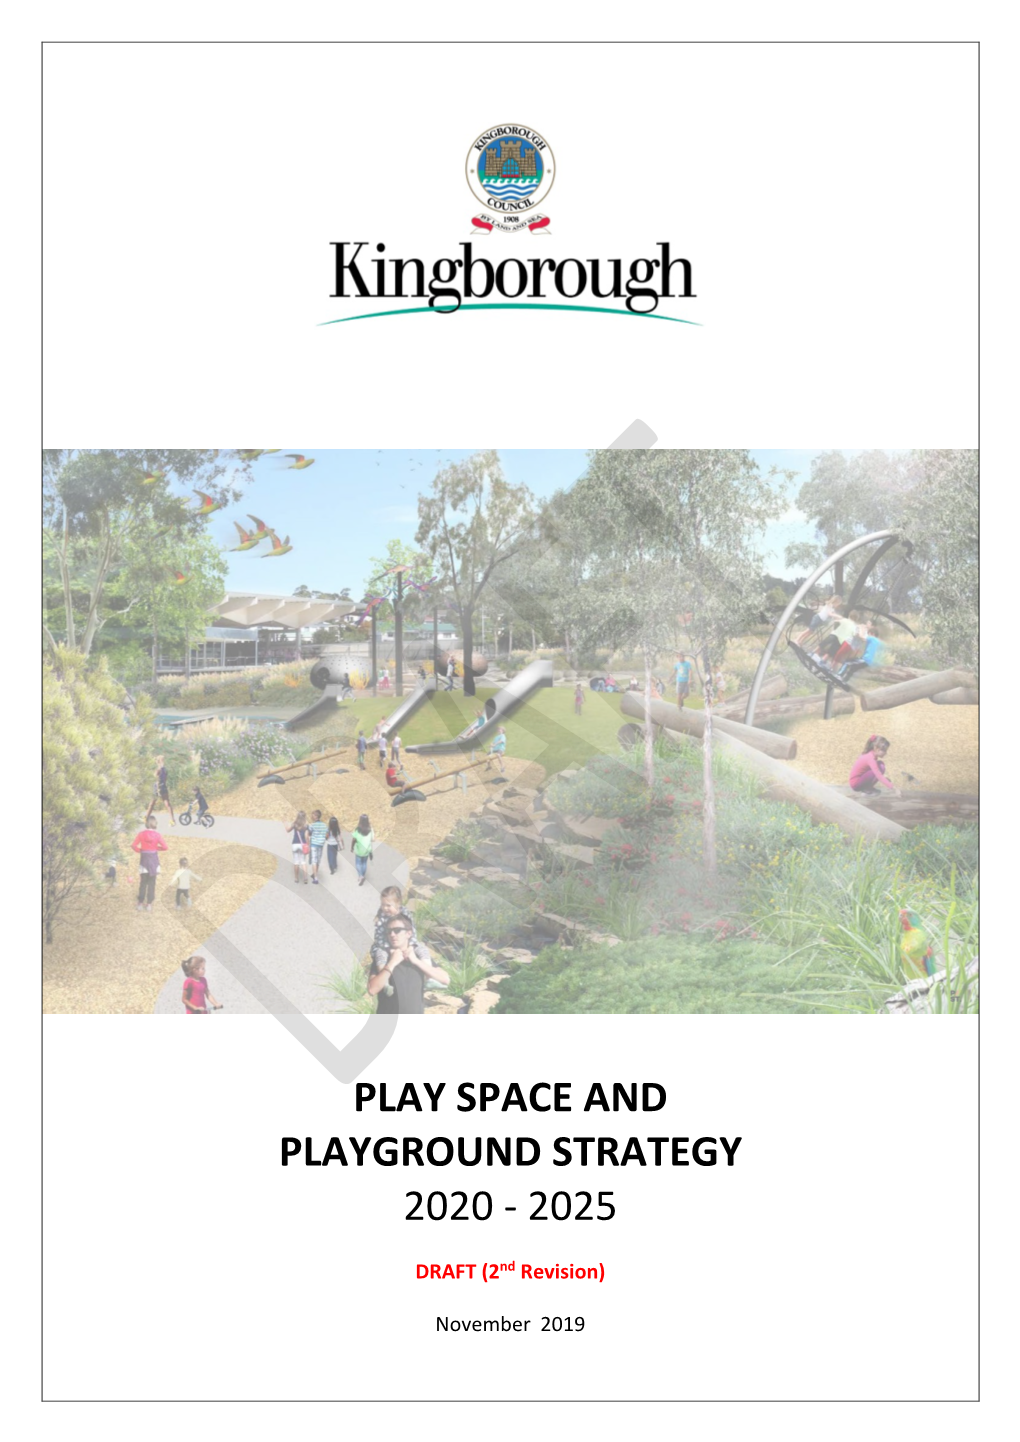 Play Space and Playground Strategy 2020 - 2025